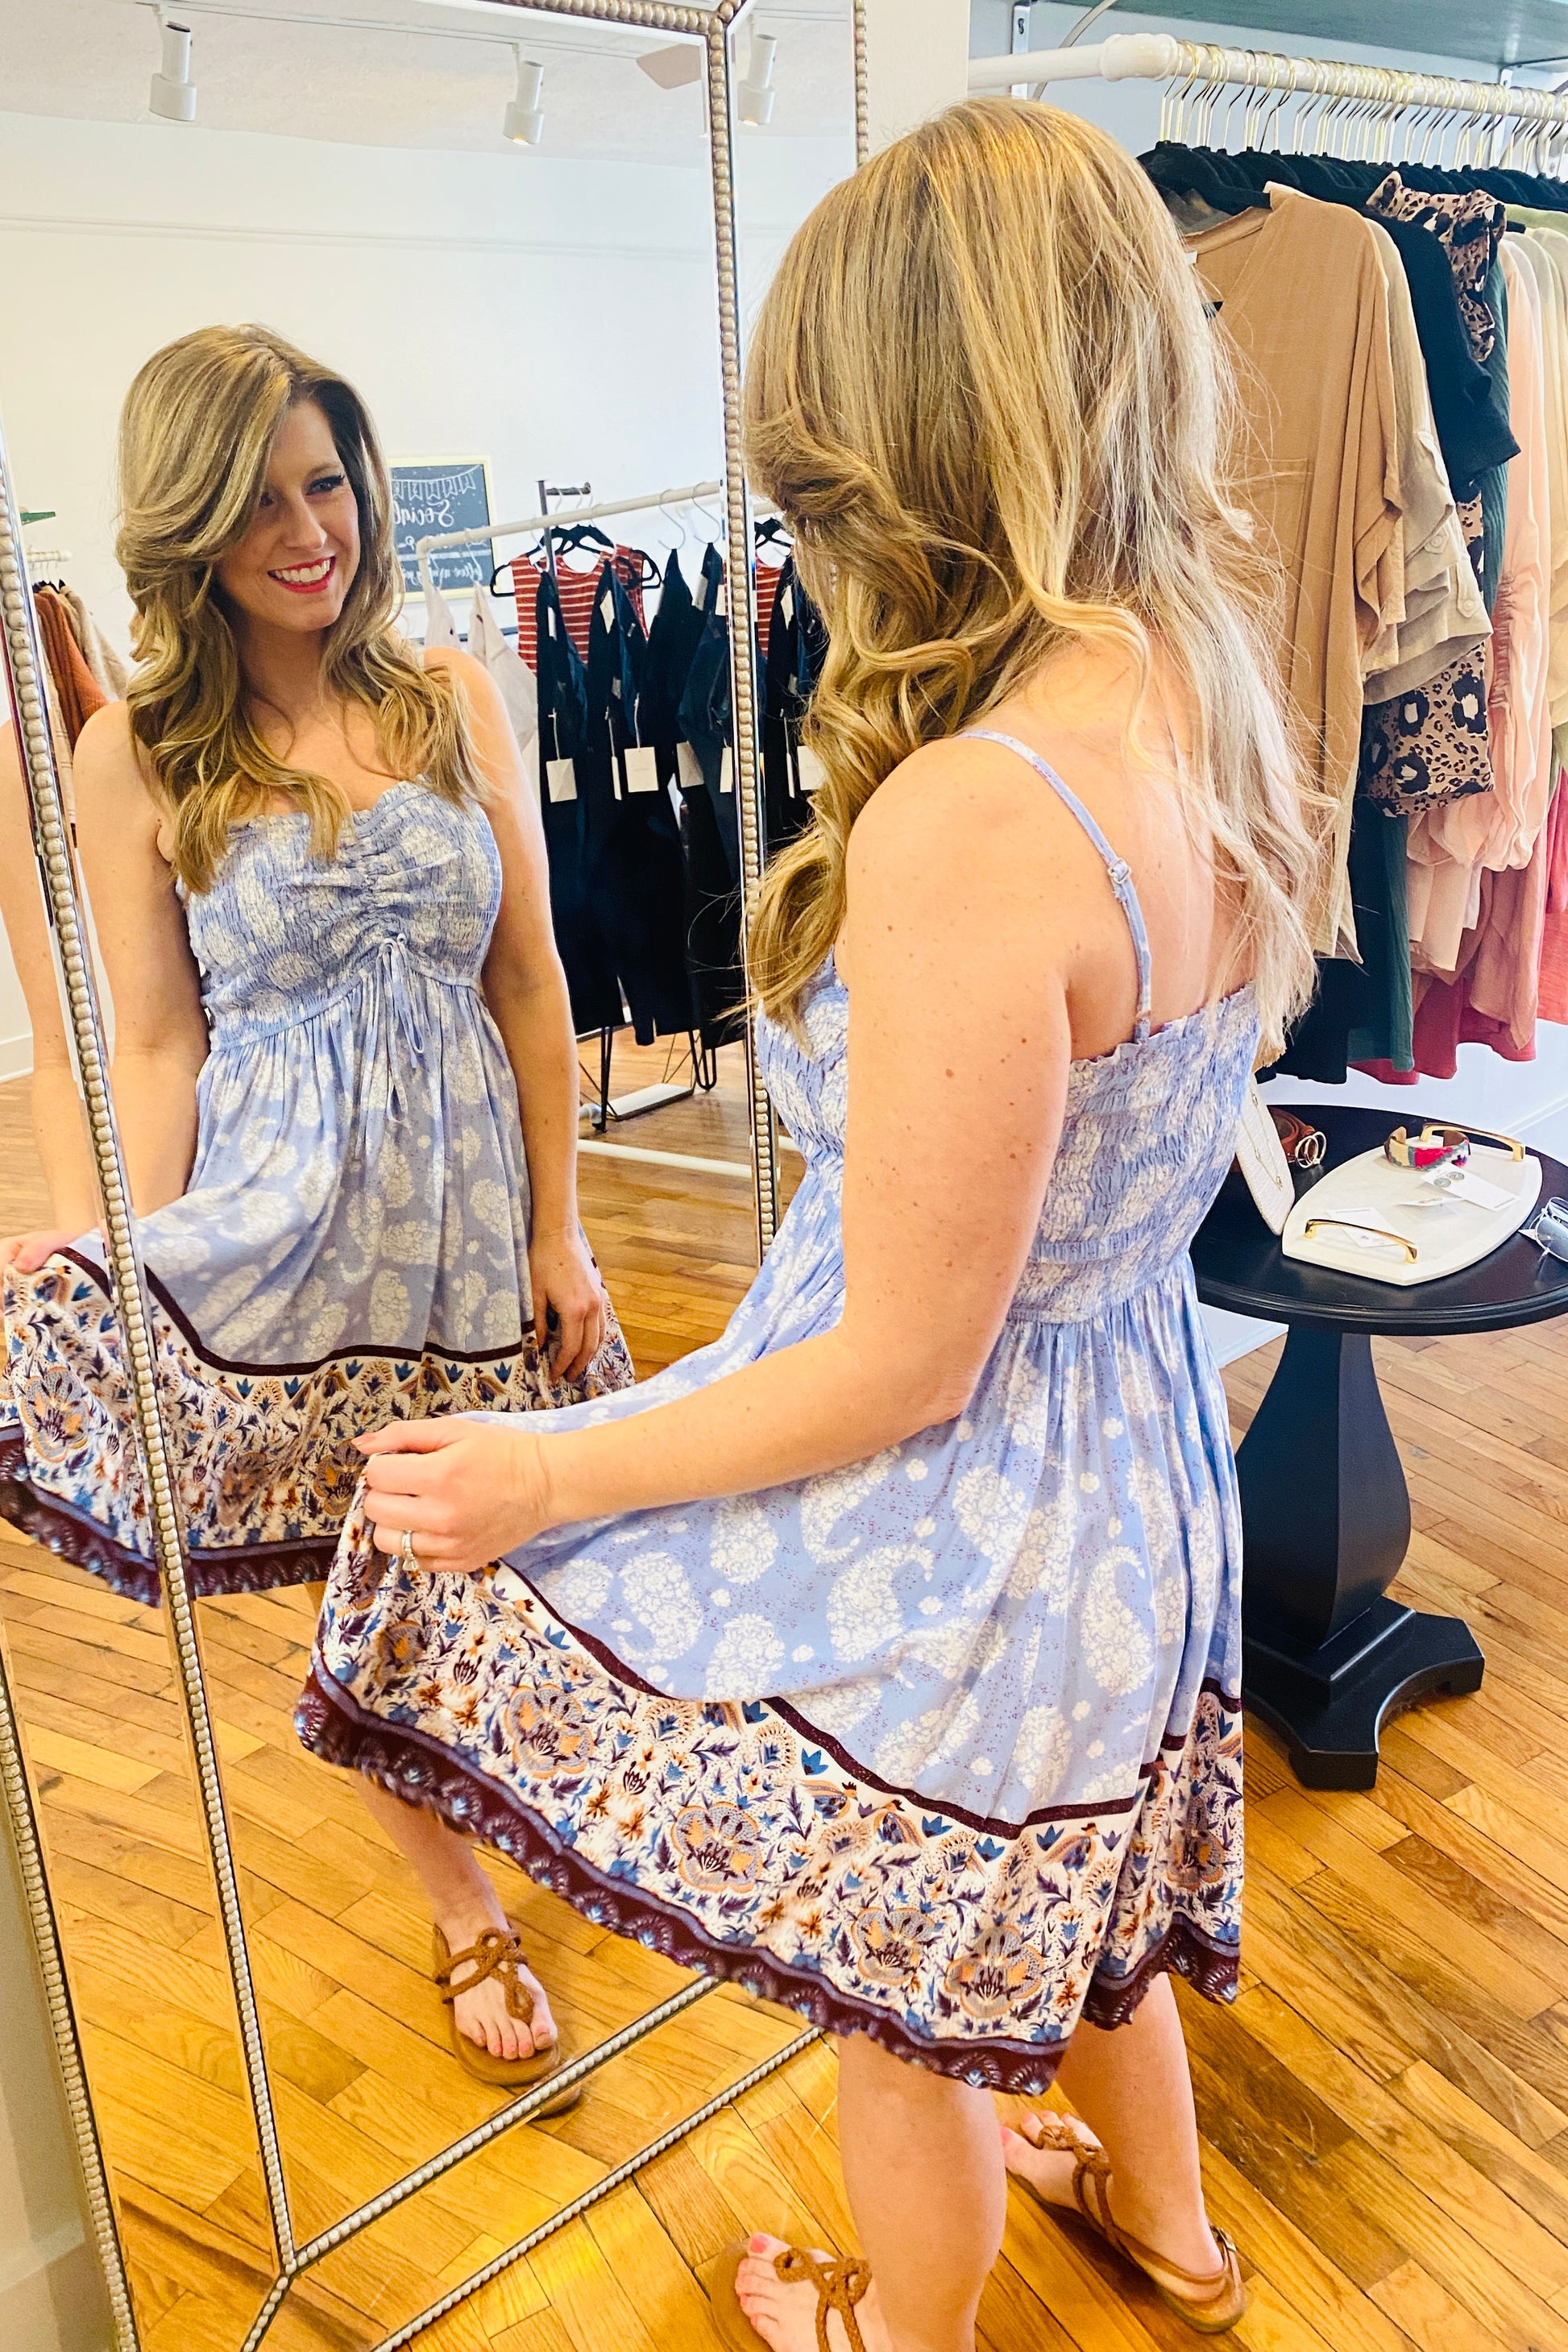 Blue Paisley Border Dress Dresses available at Southern Sunday